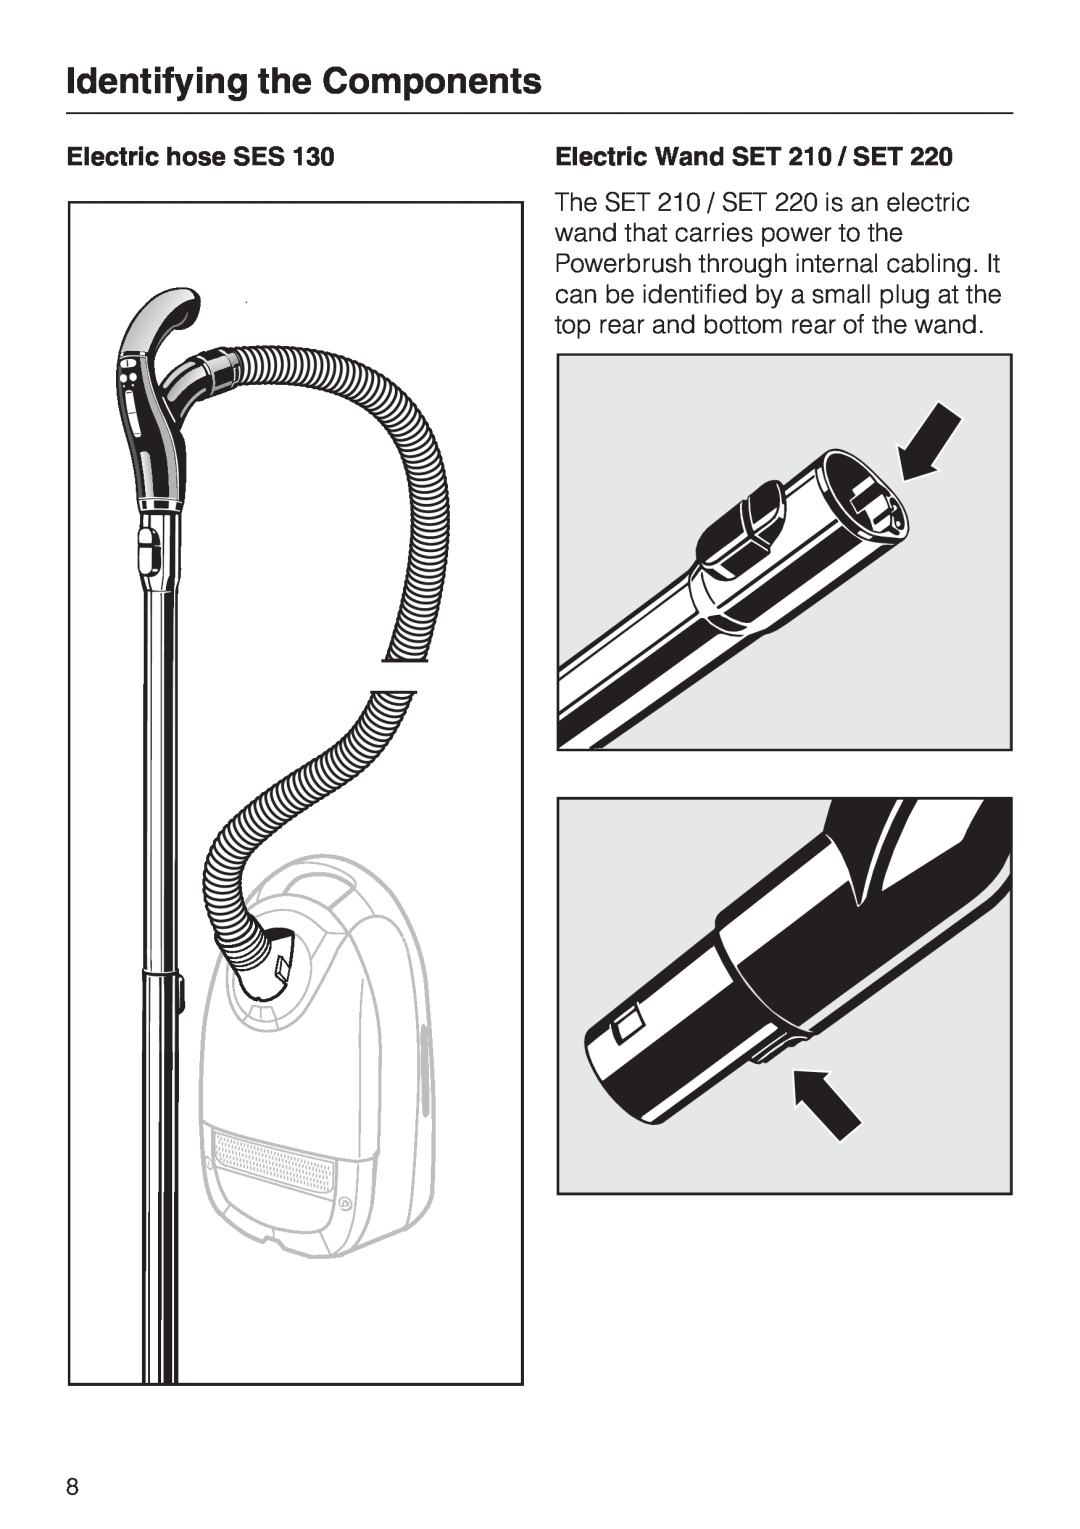 Miele 217-3, 217-2, 213-2 operating instructions Identifying the Components, Electric hose SES, Electric Wand SET 210 / SET 